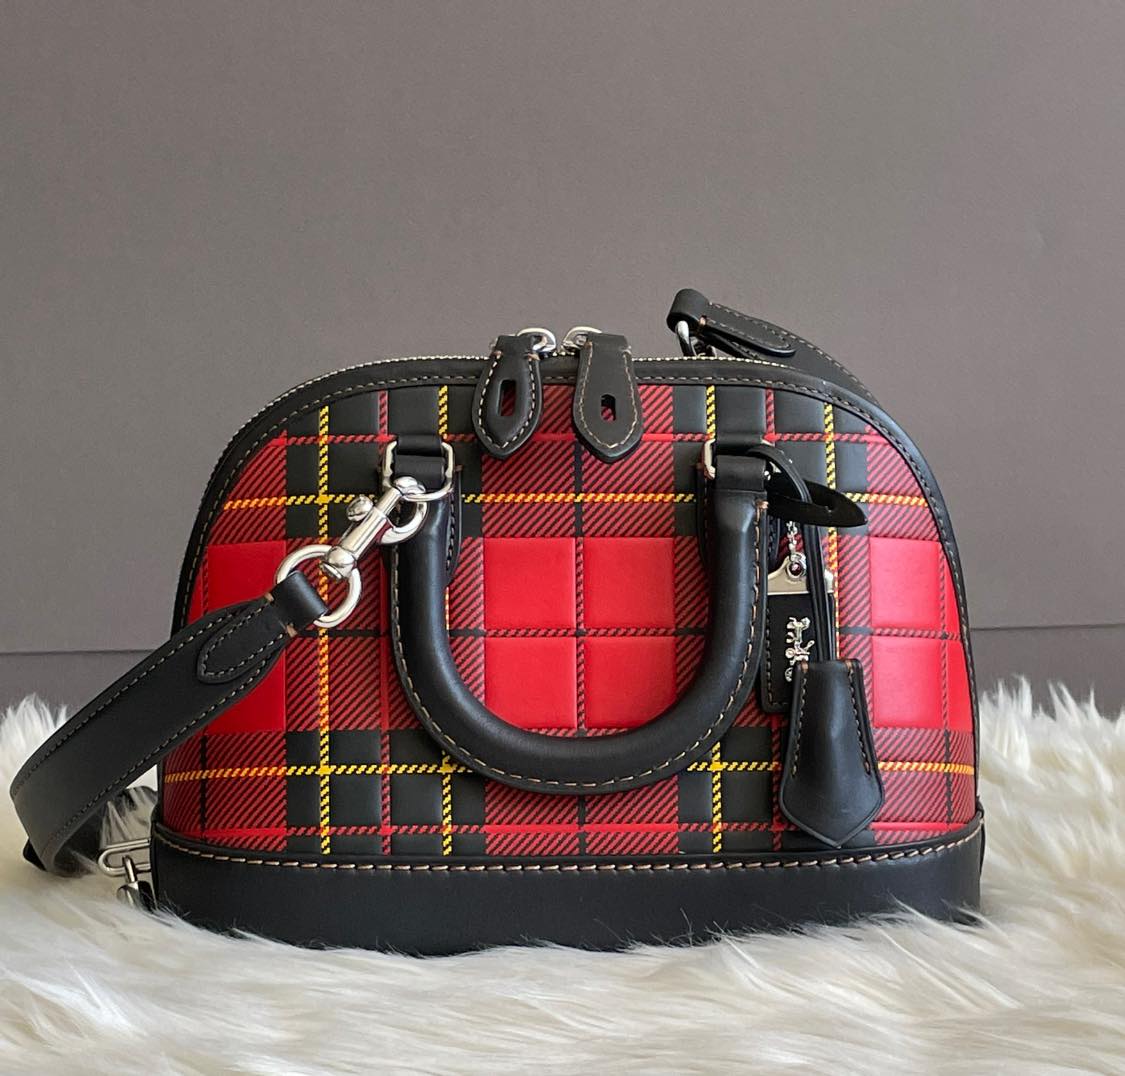 Coach Revel 24 w/Plaid Print  Review and Styling 